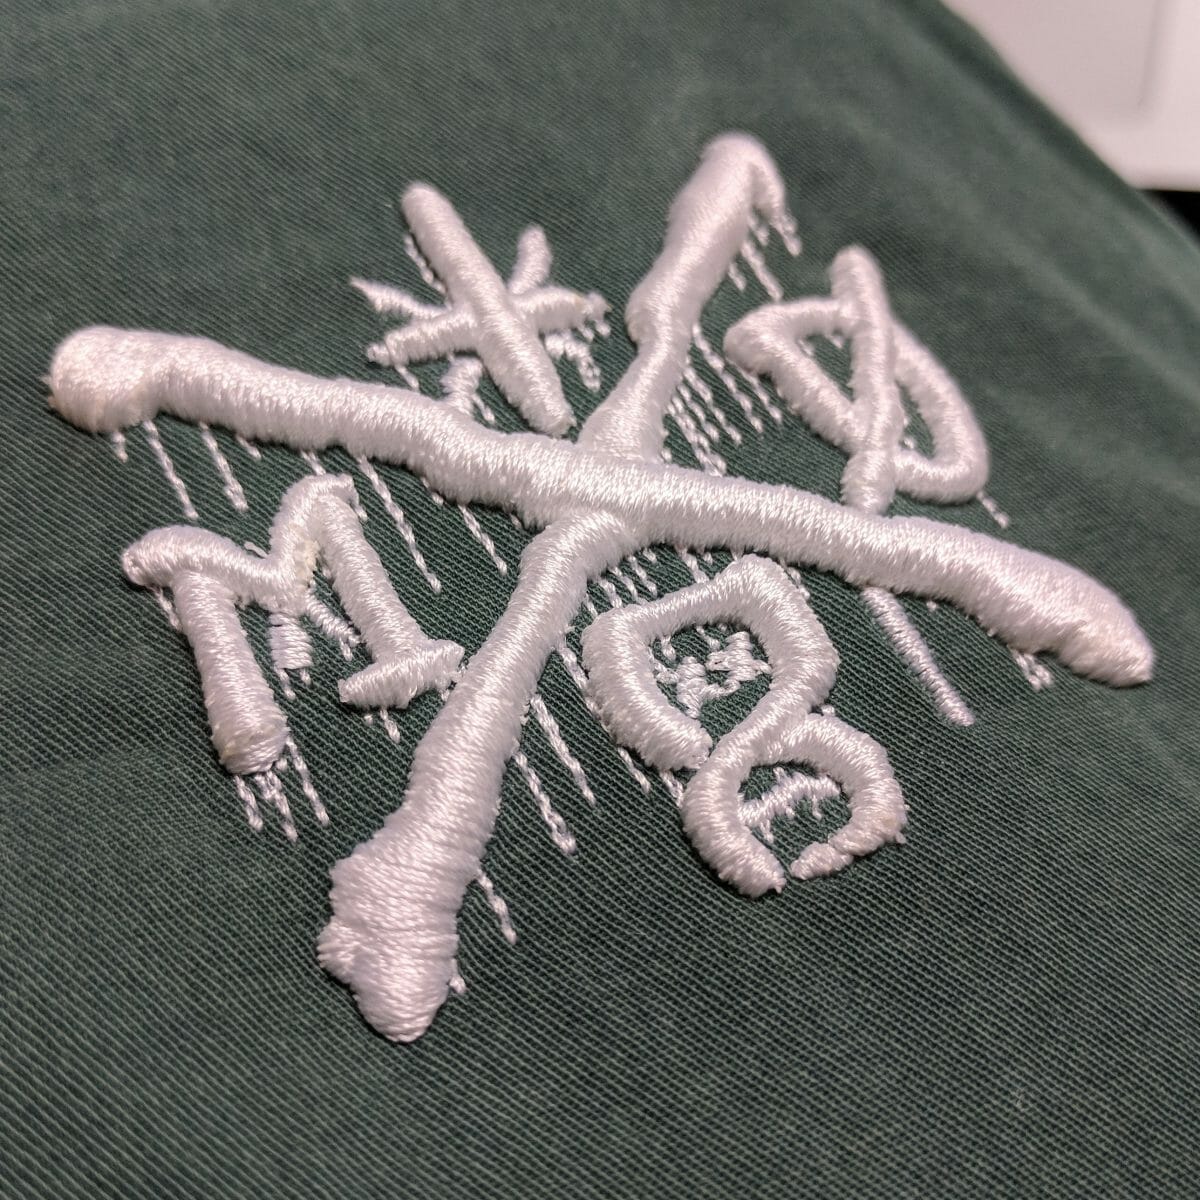 Making 3D Foam Embroidery With Puffy Foam And An Embroidery Machine